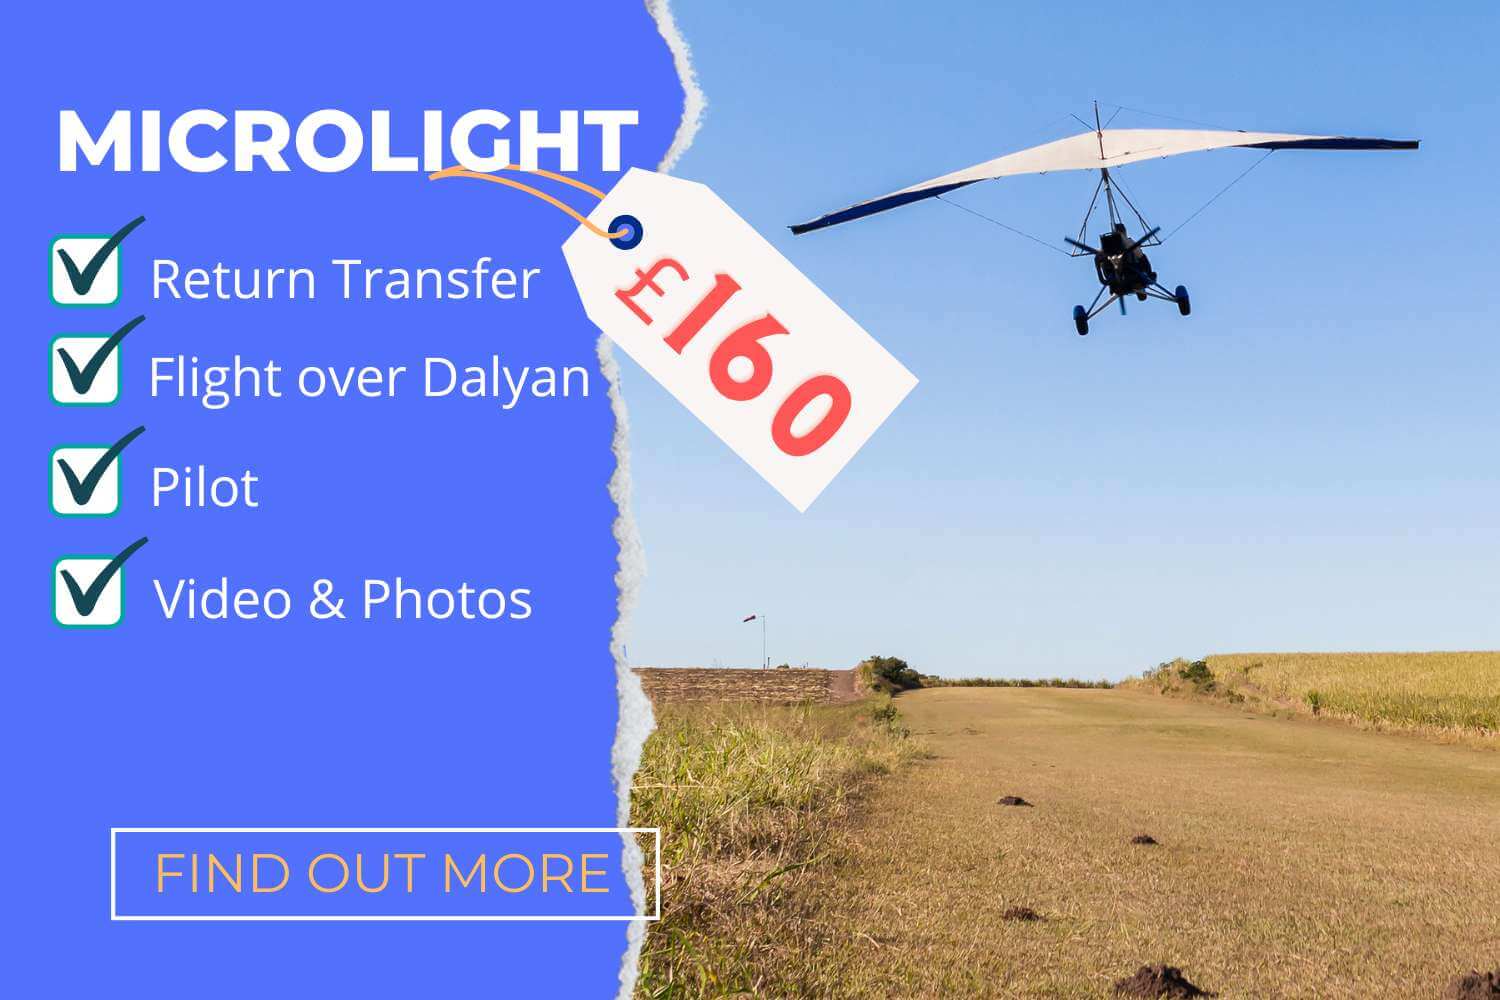 Outdoor activity, Microlight Flight in Dalyan. Transport and 17 minutes Flight with Pilot is included.